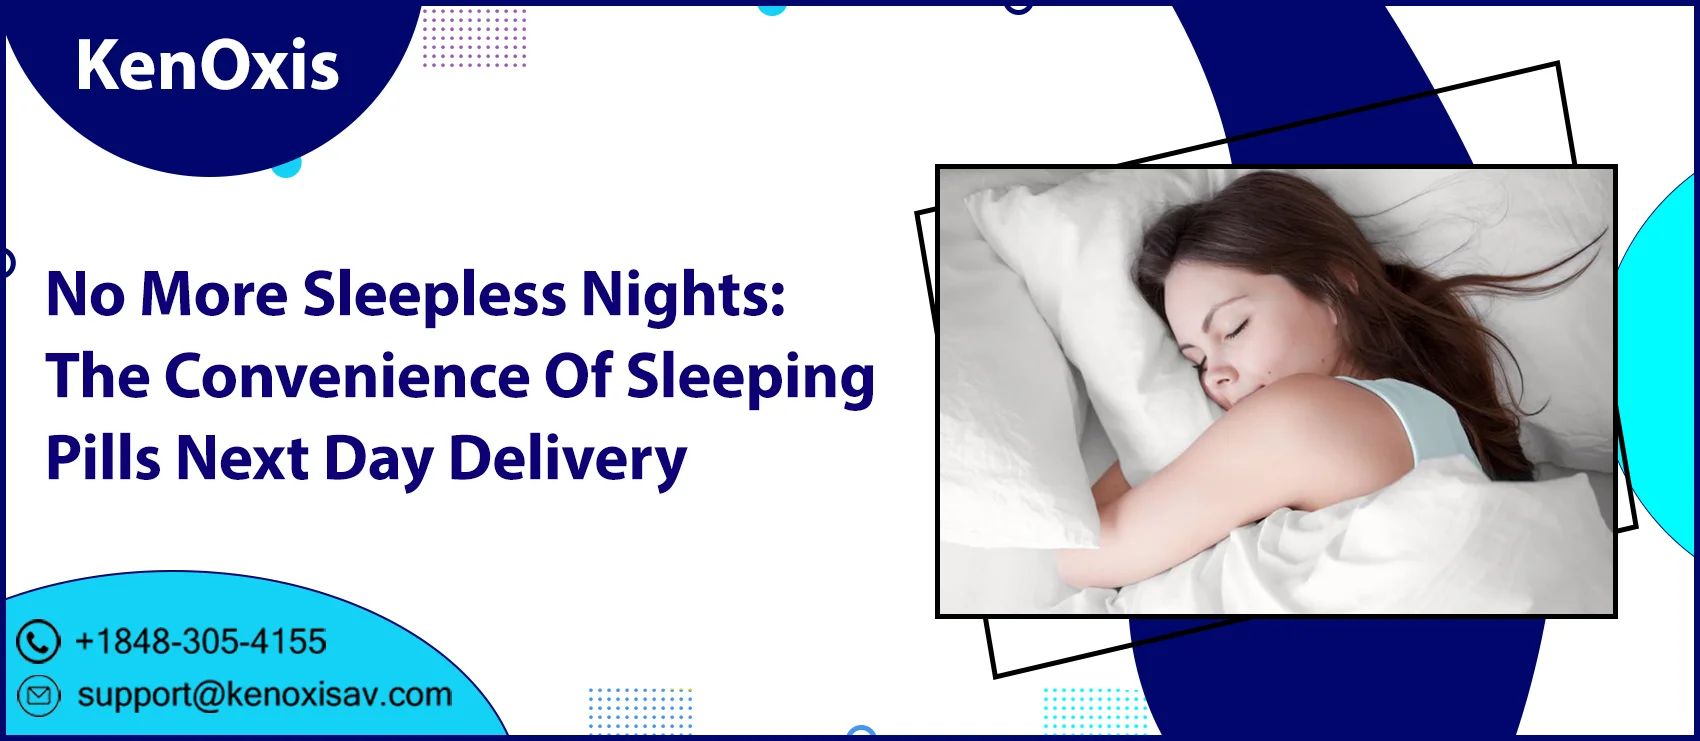 No More Sleepless Nights: The Convenience Of Sleeping Pills Next Day Delivery